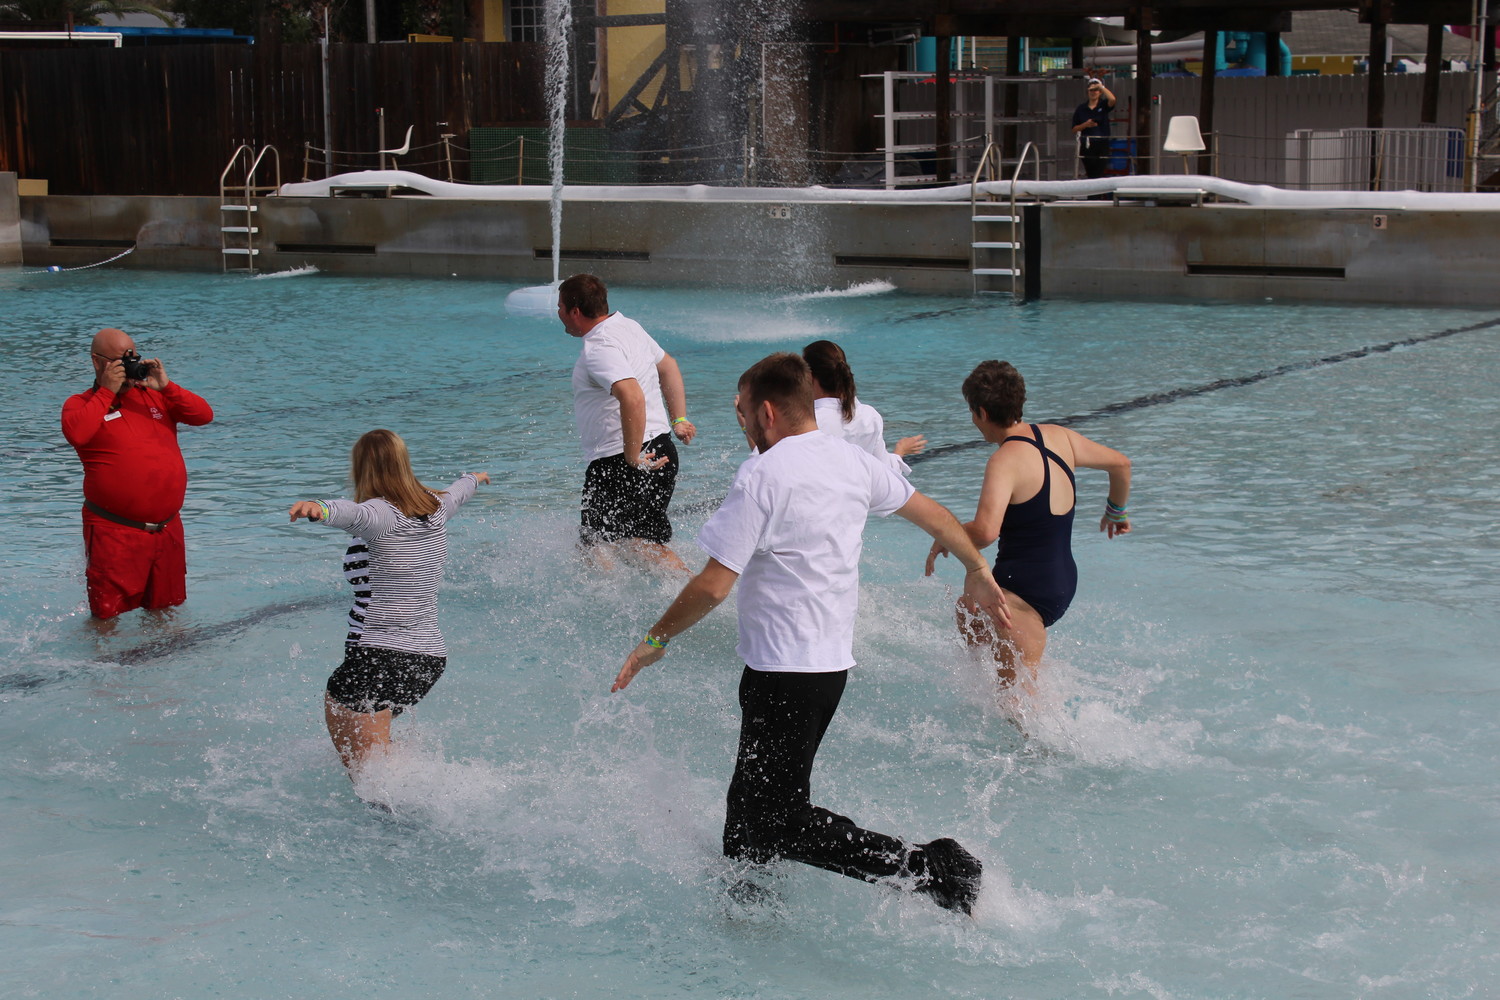 Participants of the Dec. 15 Polar Plunge benefitting Special Olympics Florida celebrate running into the cold water of the wave pool at Adventure Landing’s Shipwreck Island Water Park.